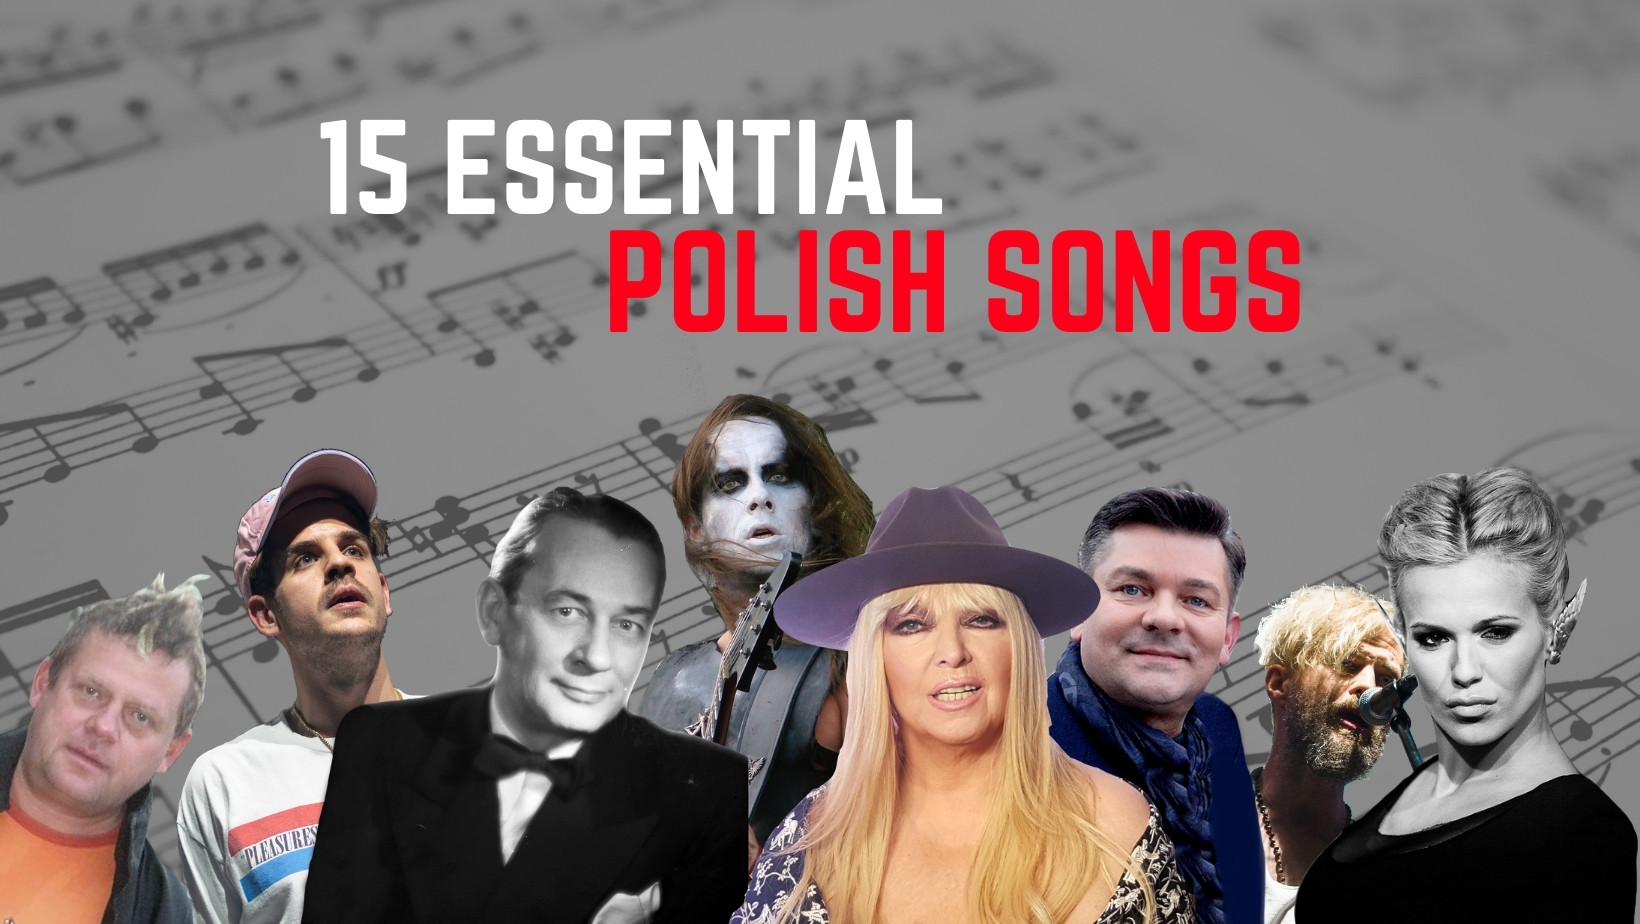 15 Essential Polish Songs You Need to Hear A Playlist(icle)